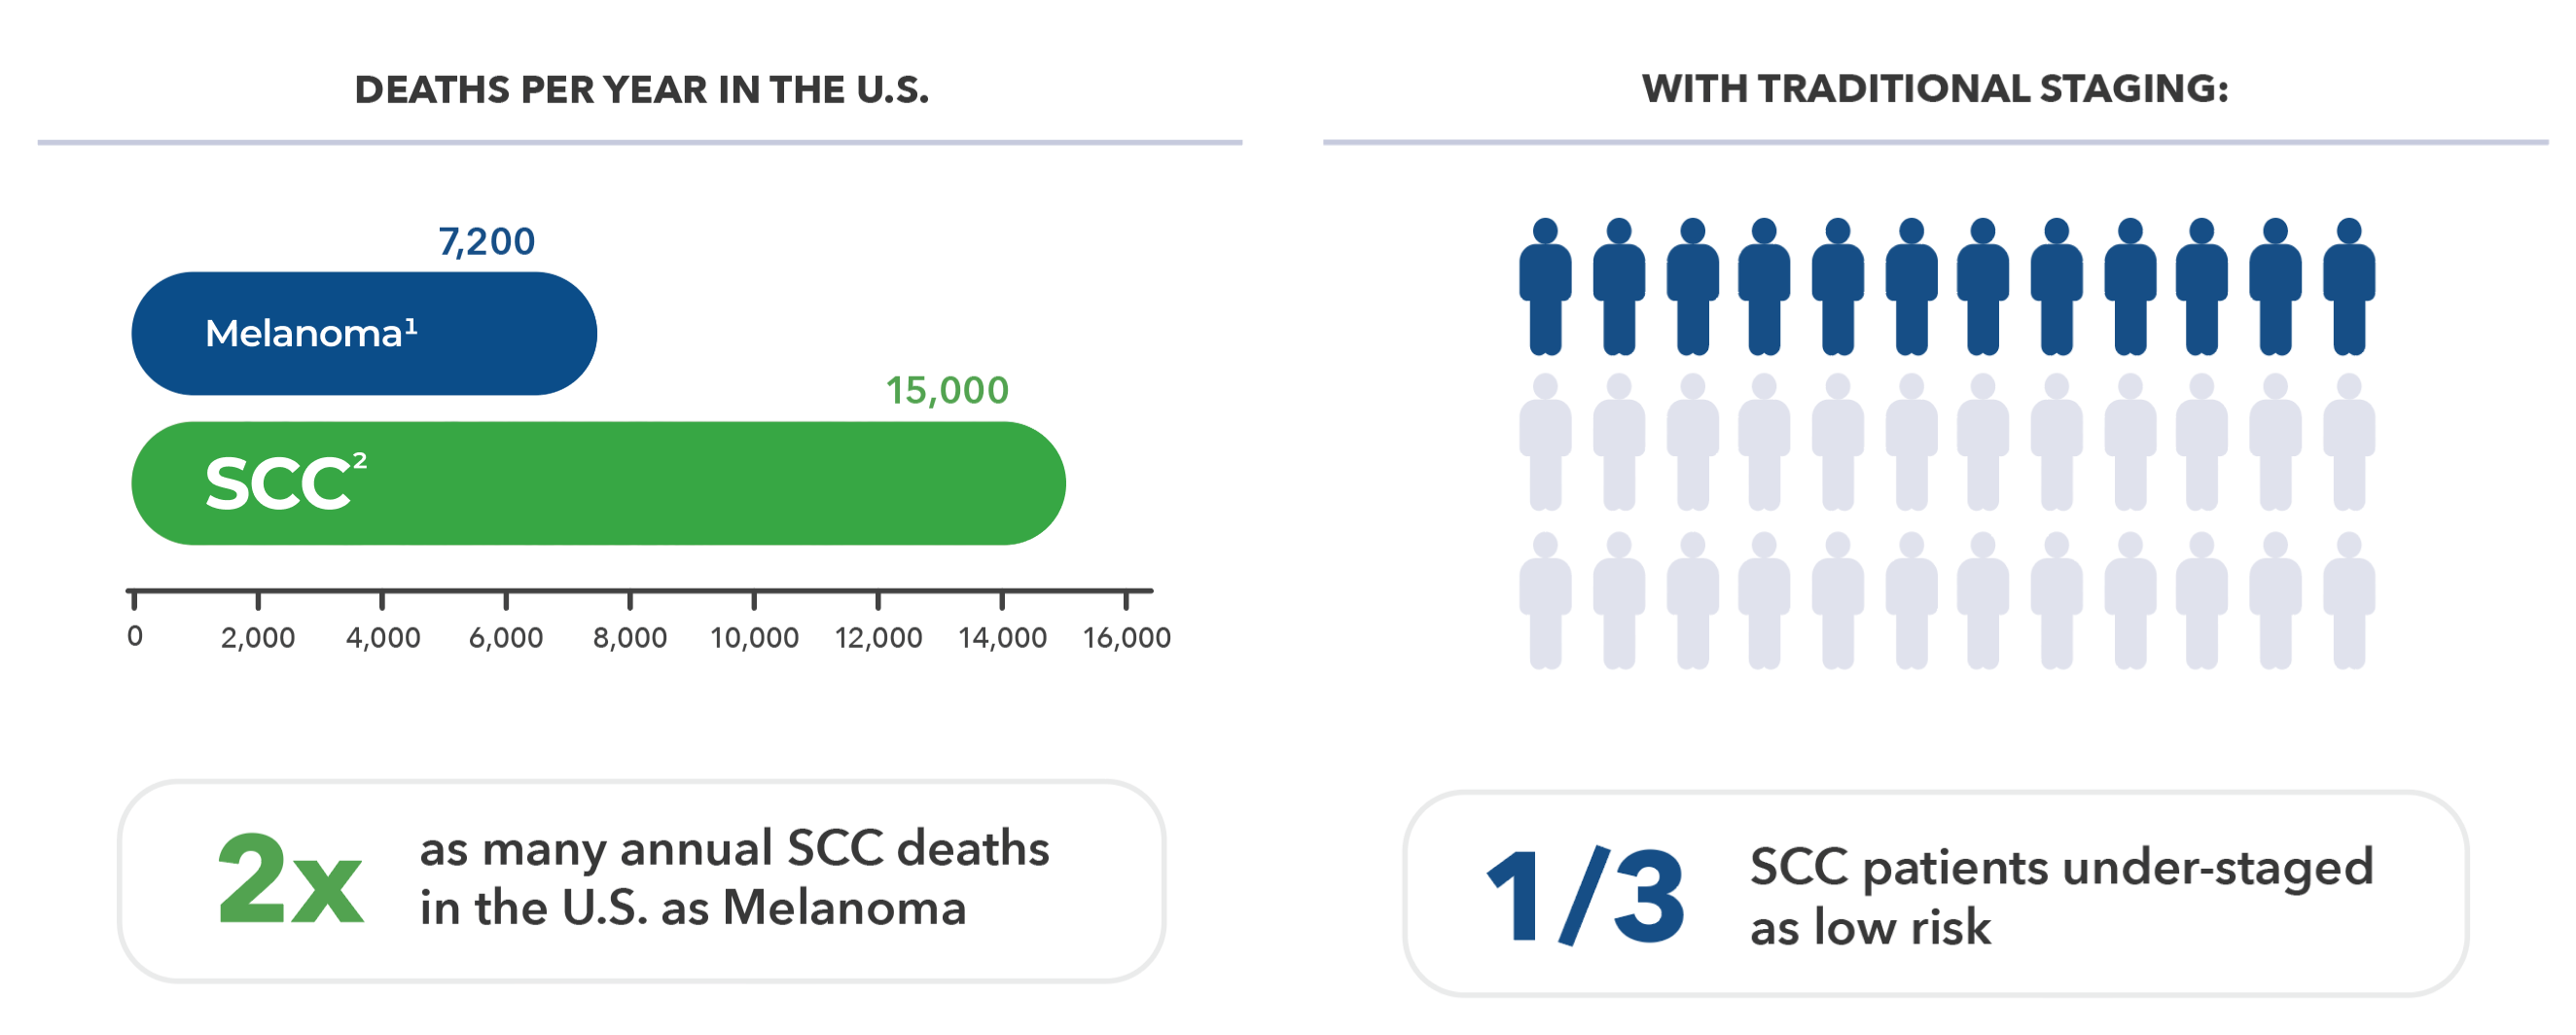 There are twice as many annual SCC death in the U.S. as melanoma. 1/3 of SCC patients are under-staged as low risk.